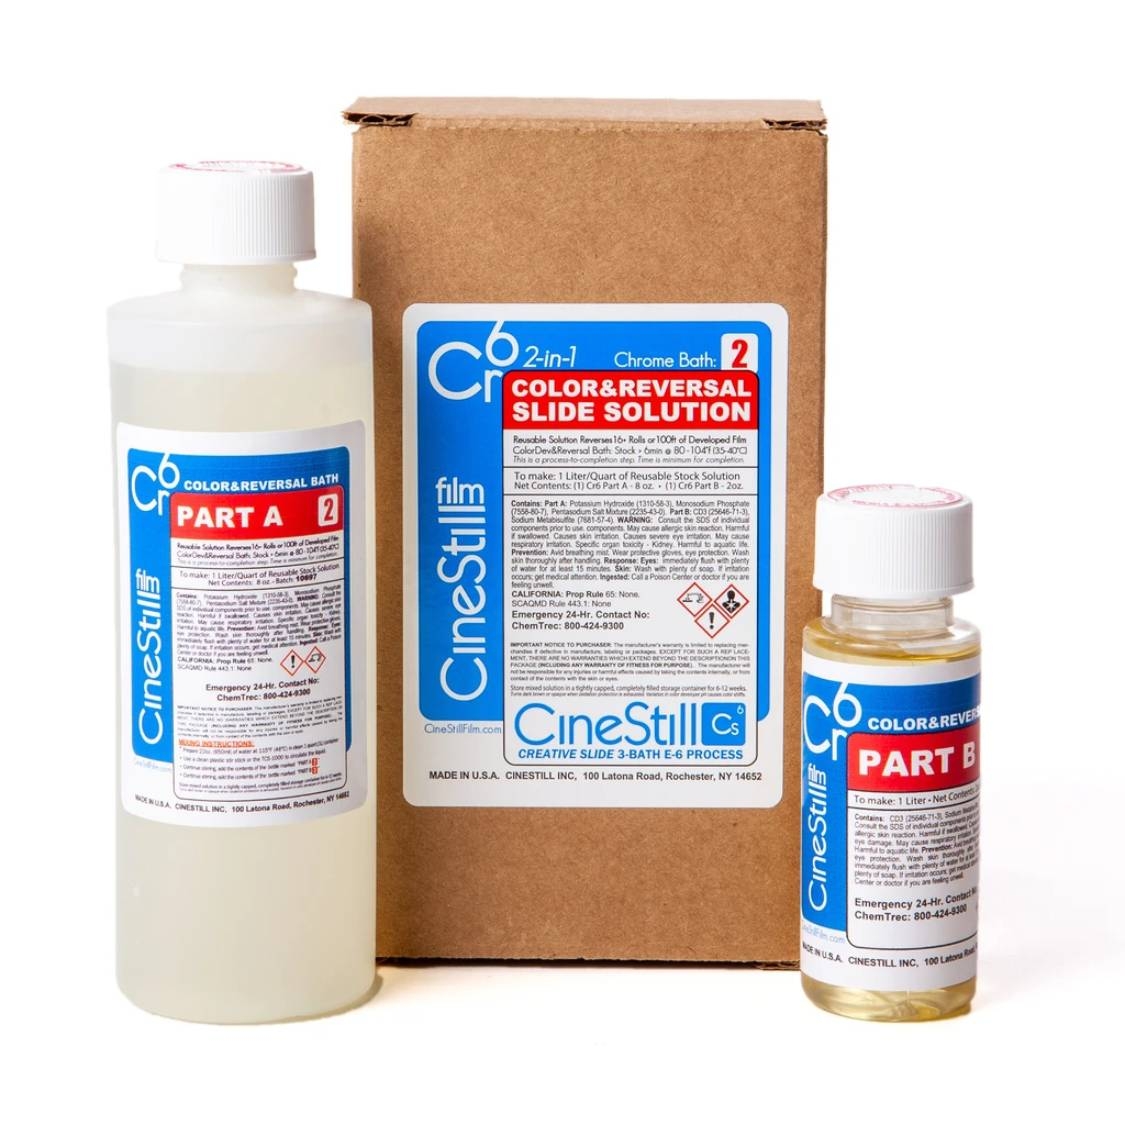 Cinestilll CR6 Color and Reversal 2-in-1 Slide Solution, for the CS6 3-Bath Process (E-6 Chrome)